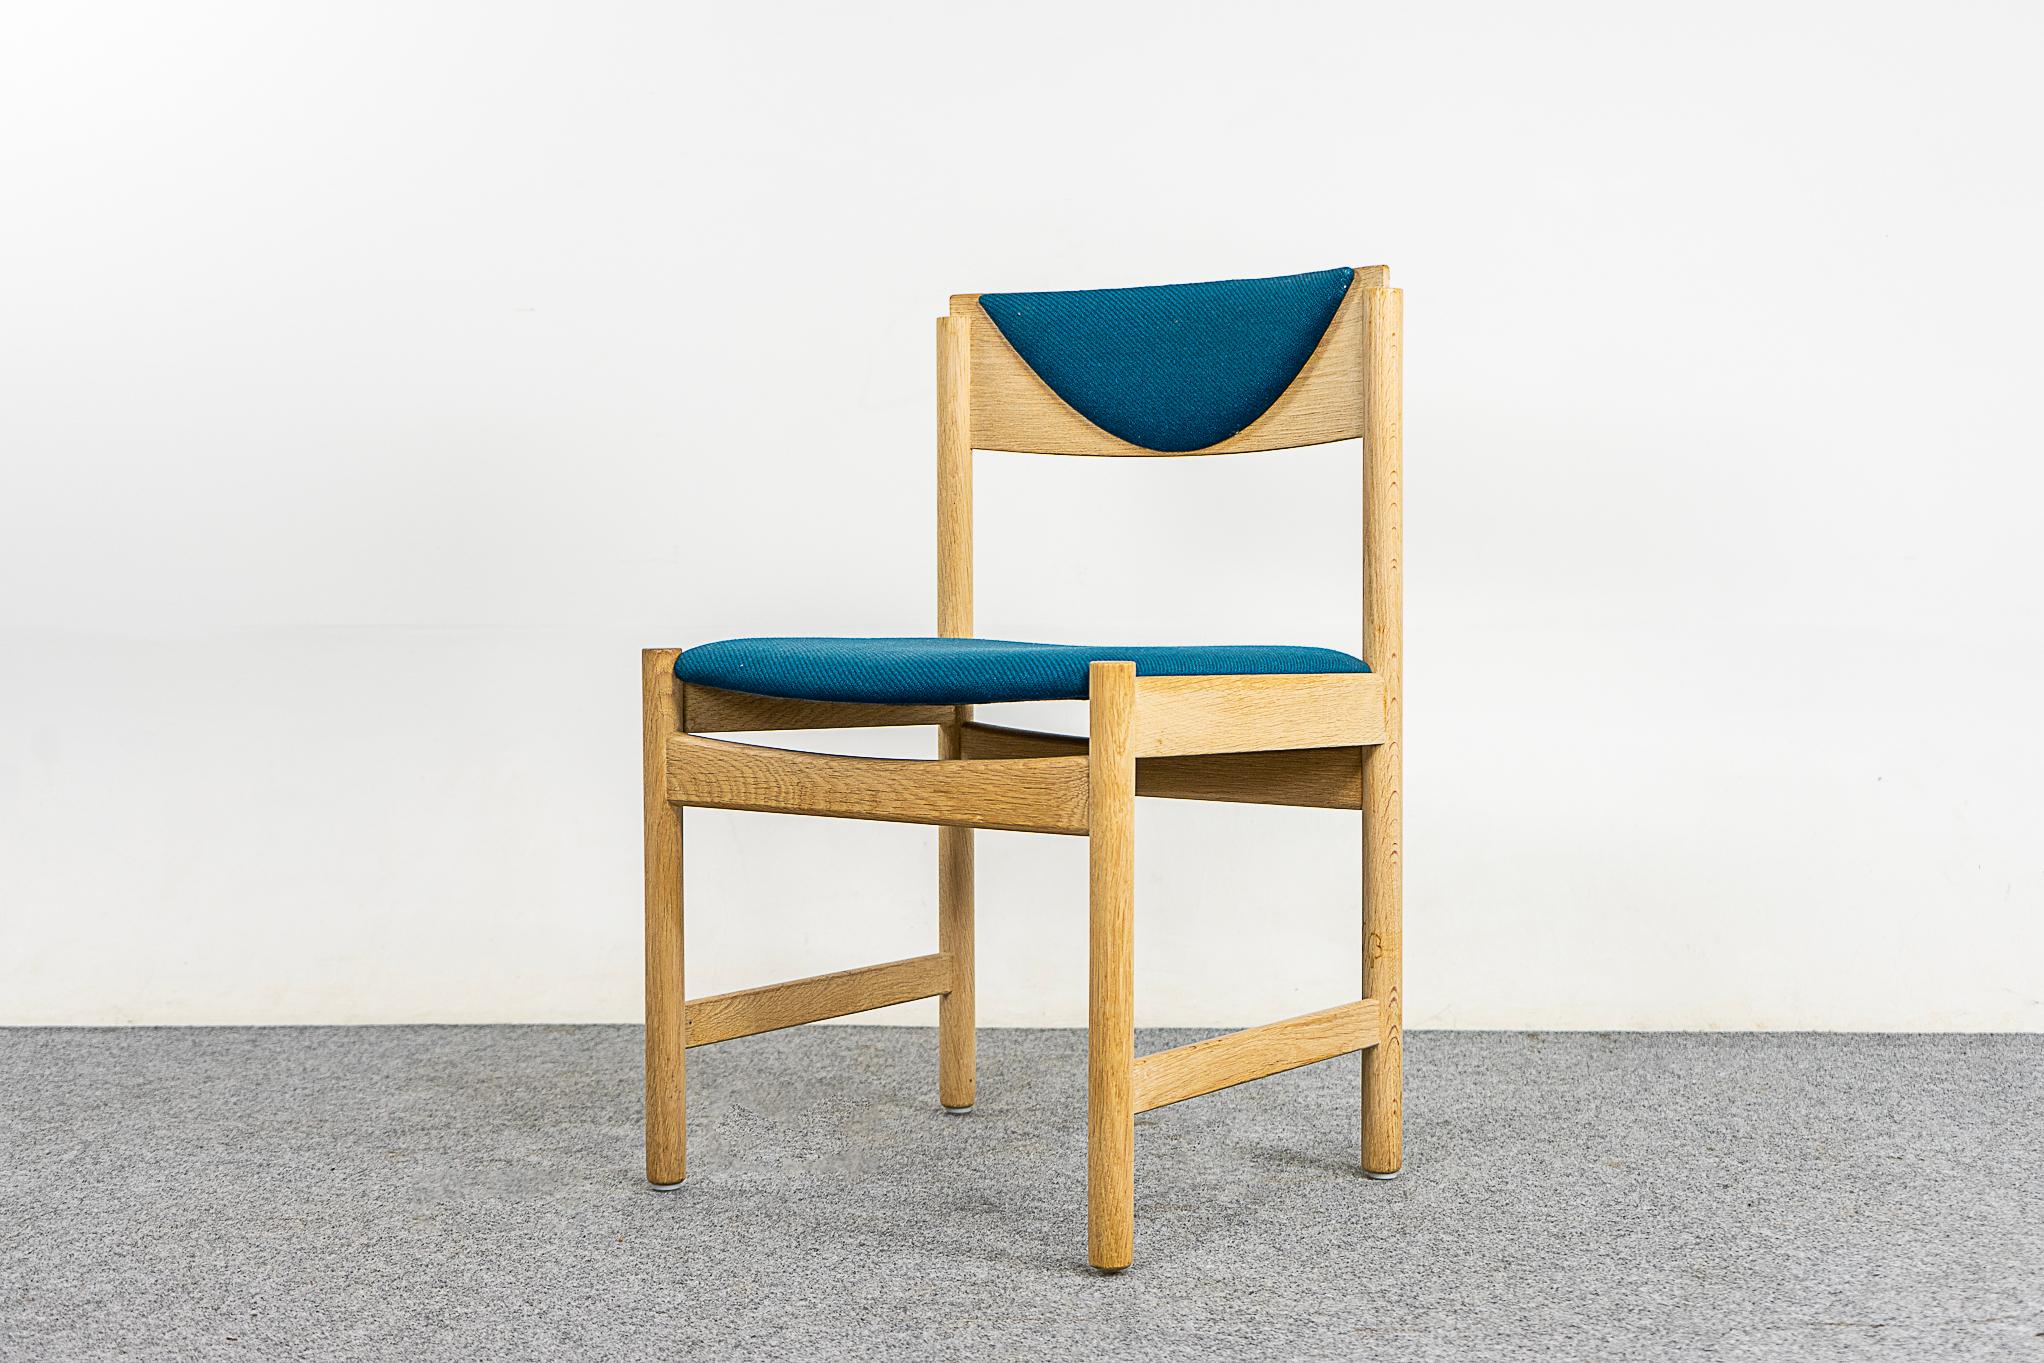 Oak dining chairs, circa 1960's. Beautifully curved backrests and generous seat. Solid legs feature cross braces for stability/support. Curved half moon original upholstered backrests, with minor wear. Very unique!

Please inquire for international